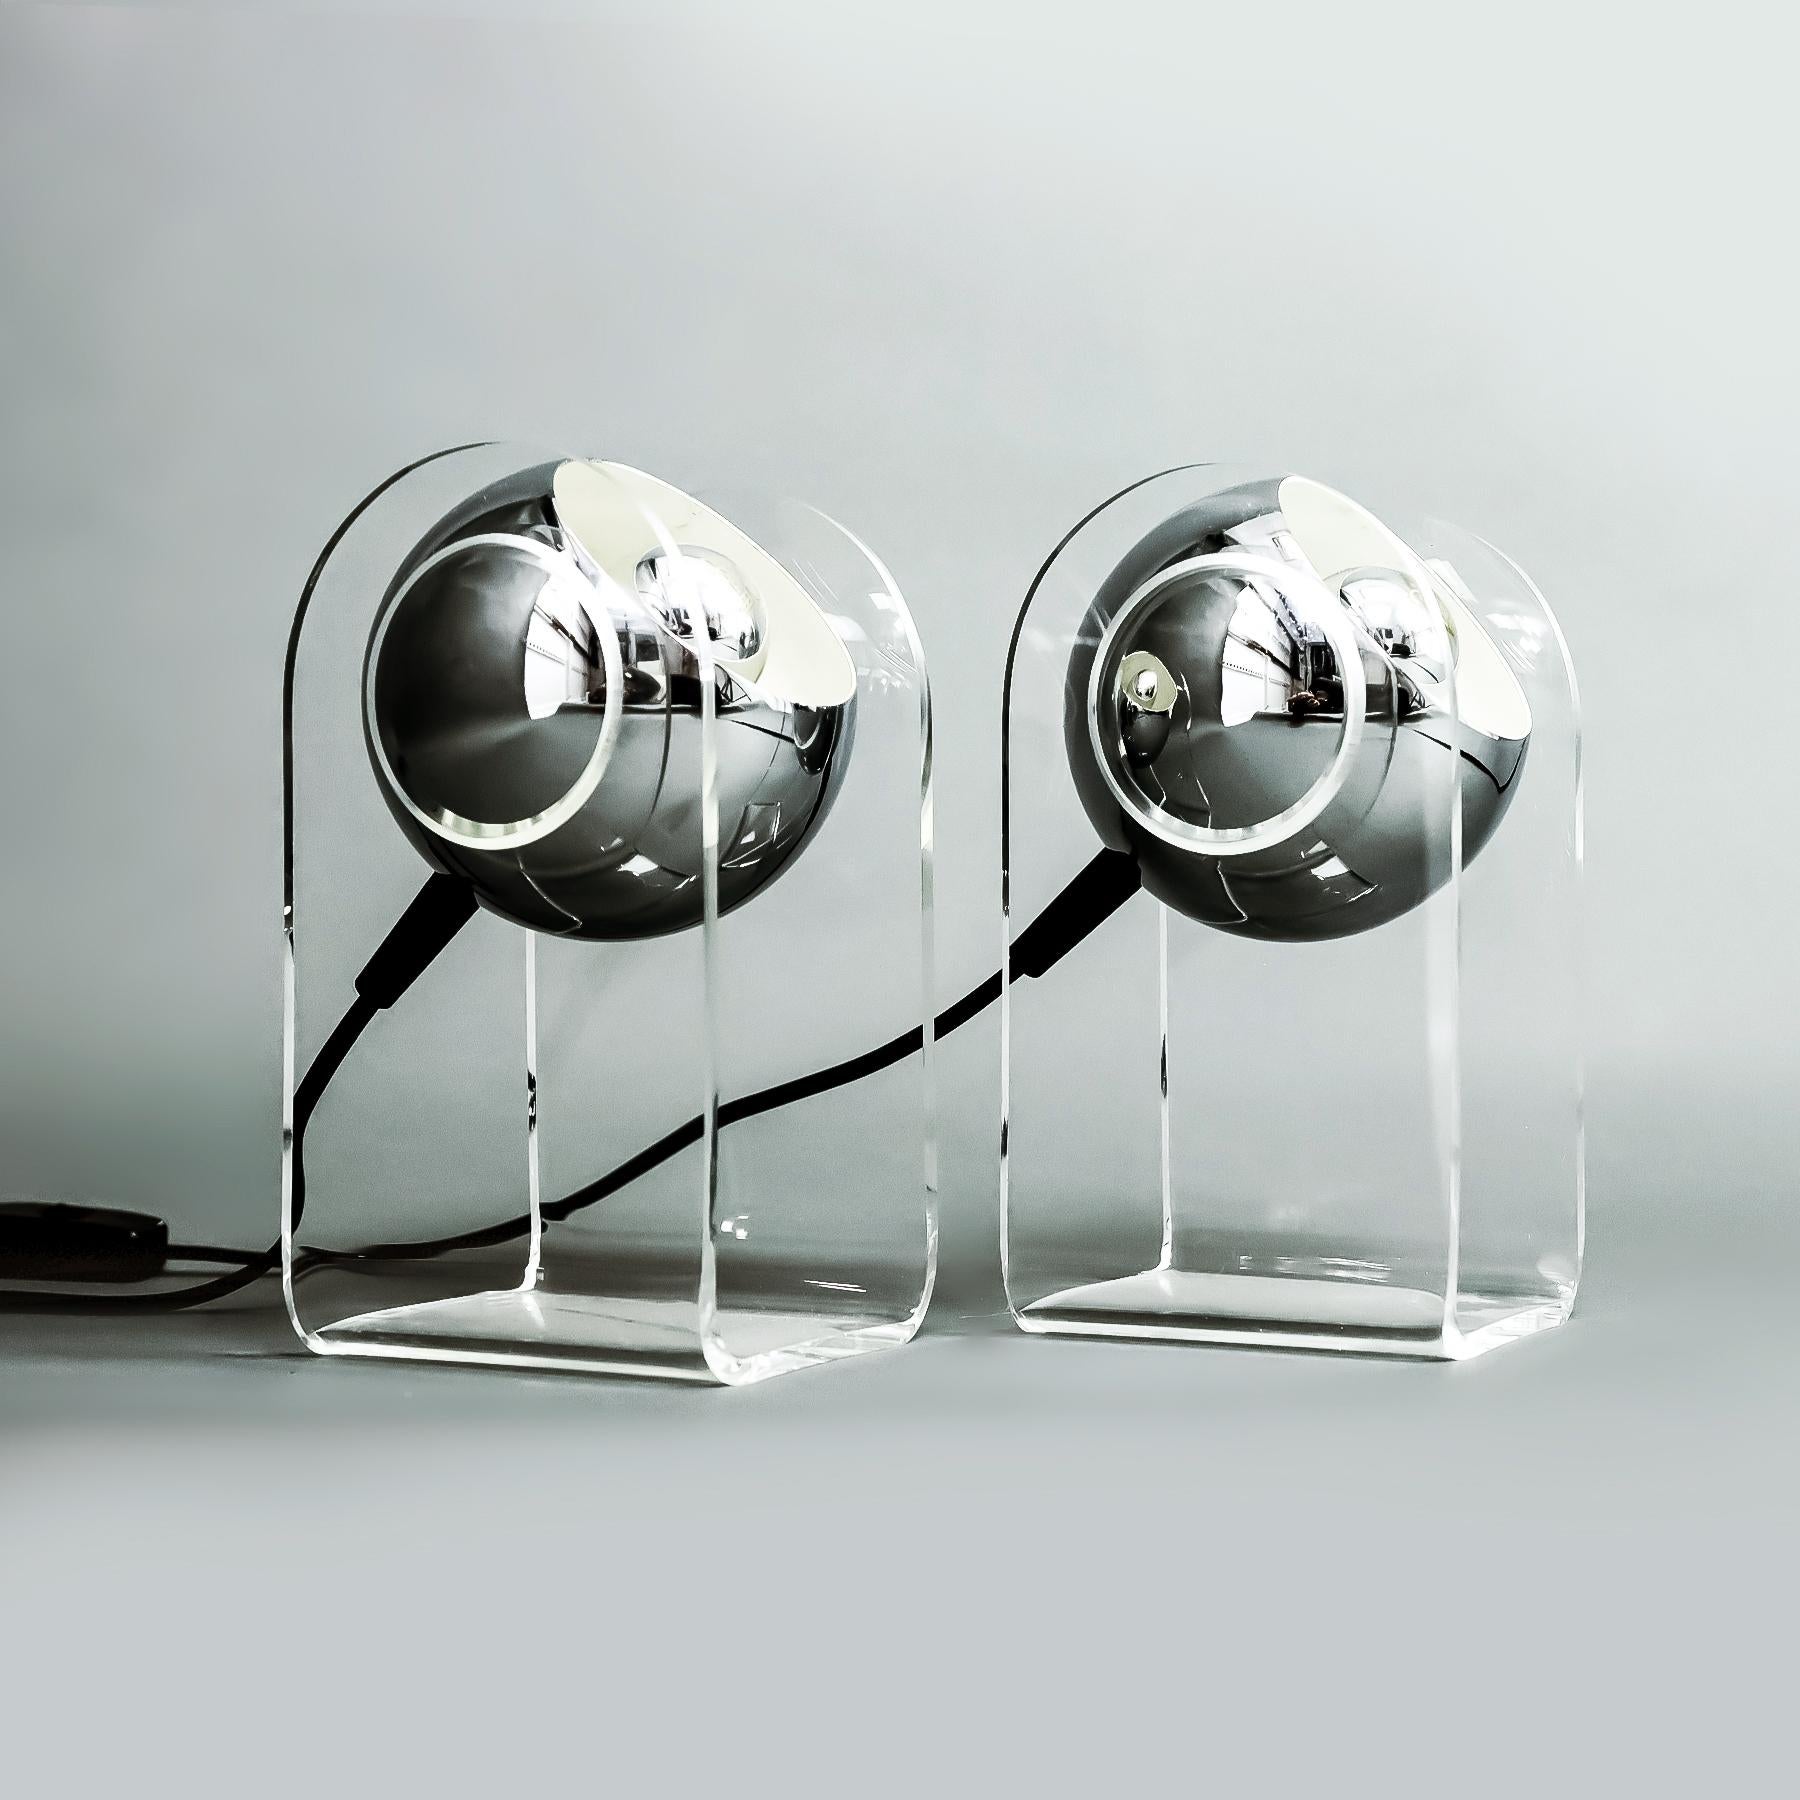 Pair of original vintage Italian Gino Sarfatti Model 540 table lamps for Arteluce, 1968

The 540 is, unfortunately, one of those designs that has many listings that are being sold as originals, but that are in fact copies – but fortunately, once you